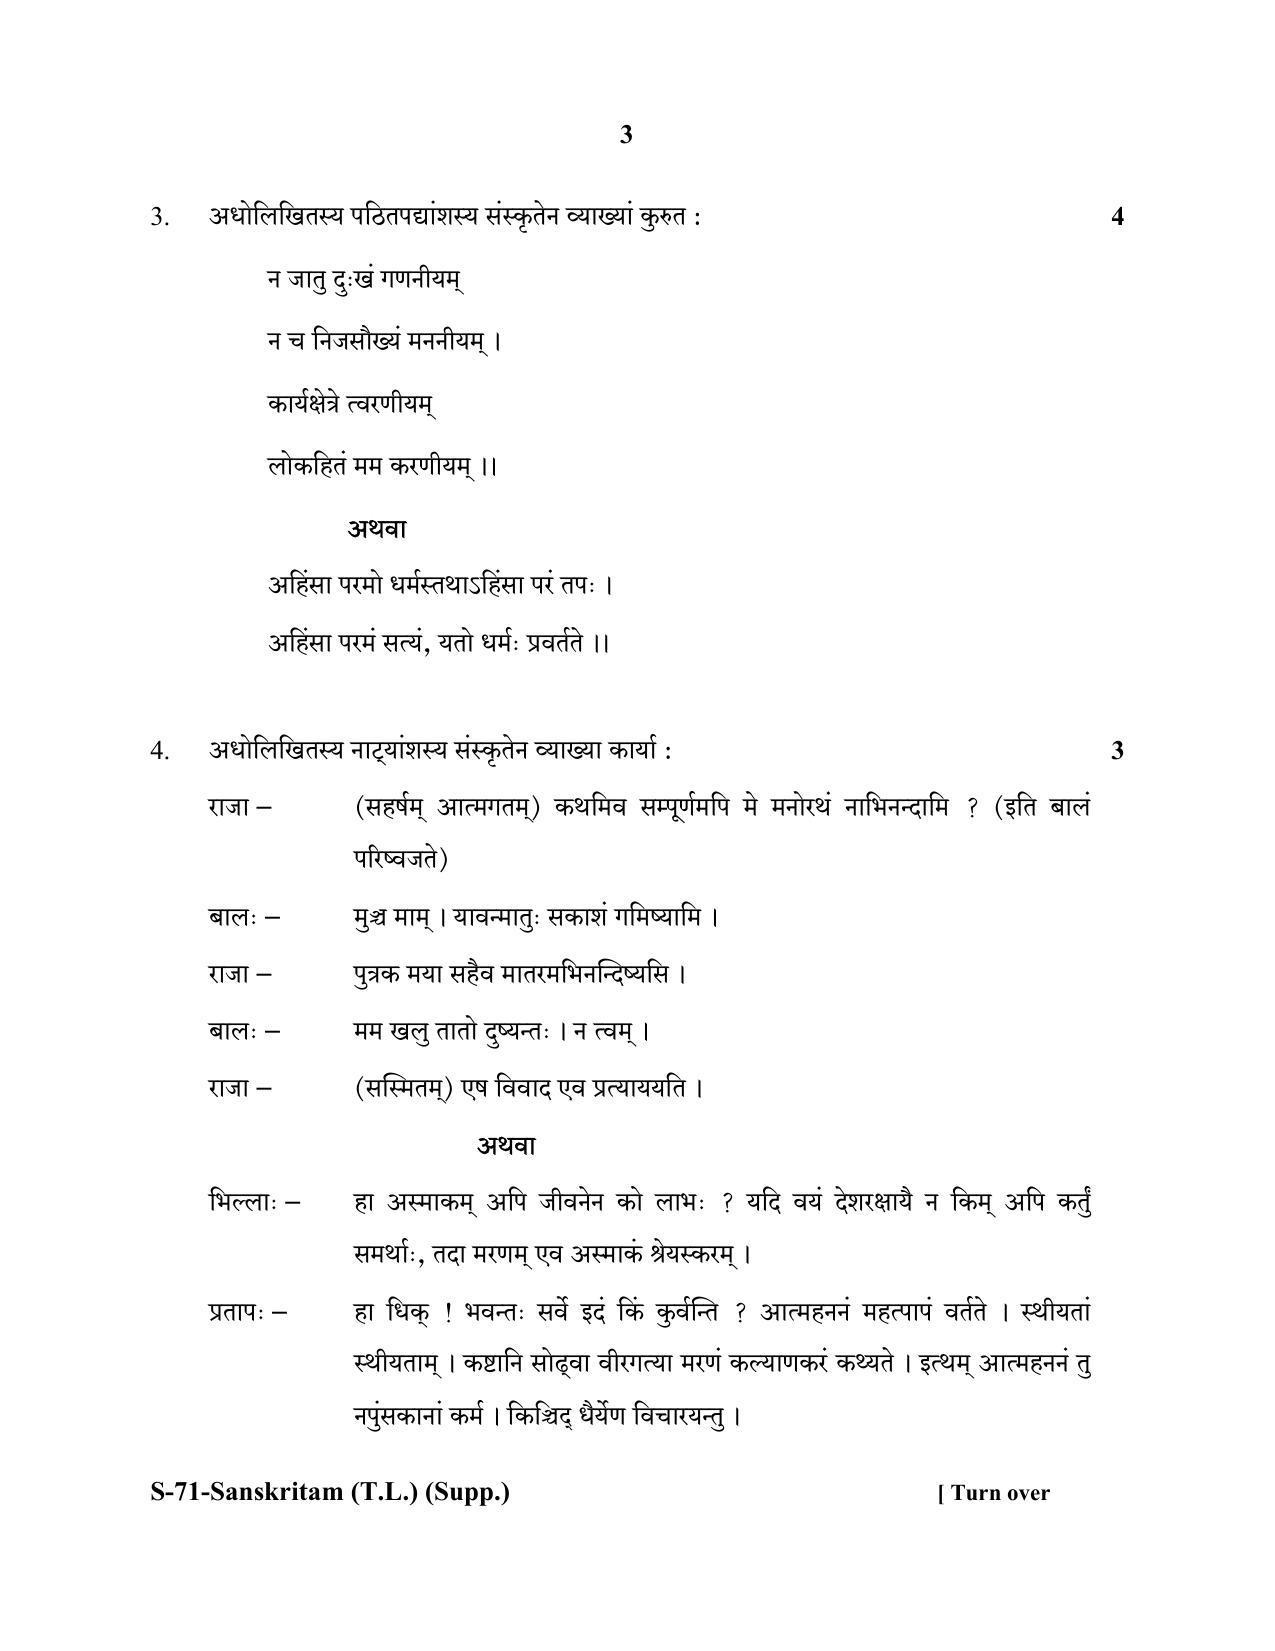 RBSE Class 10 Sanskrit TL Supplementary 2020 Question Paper - Page 3